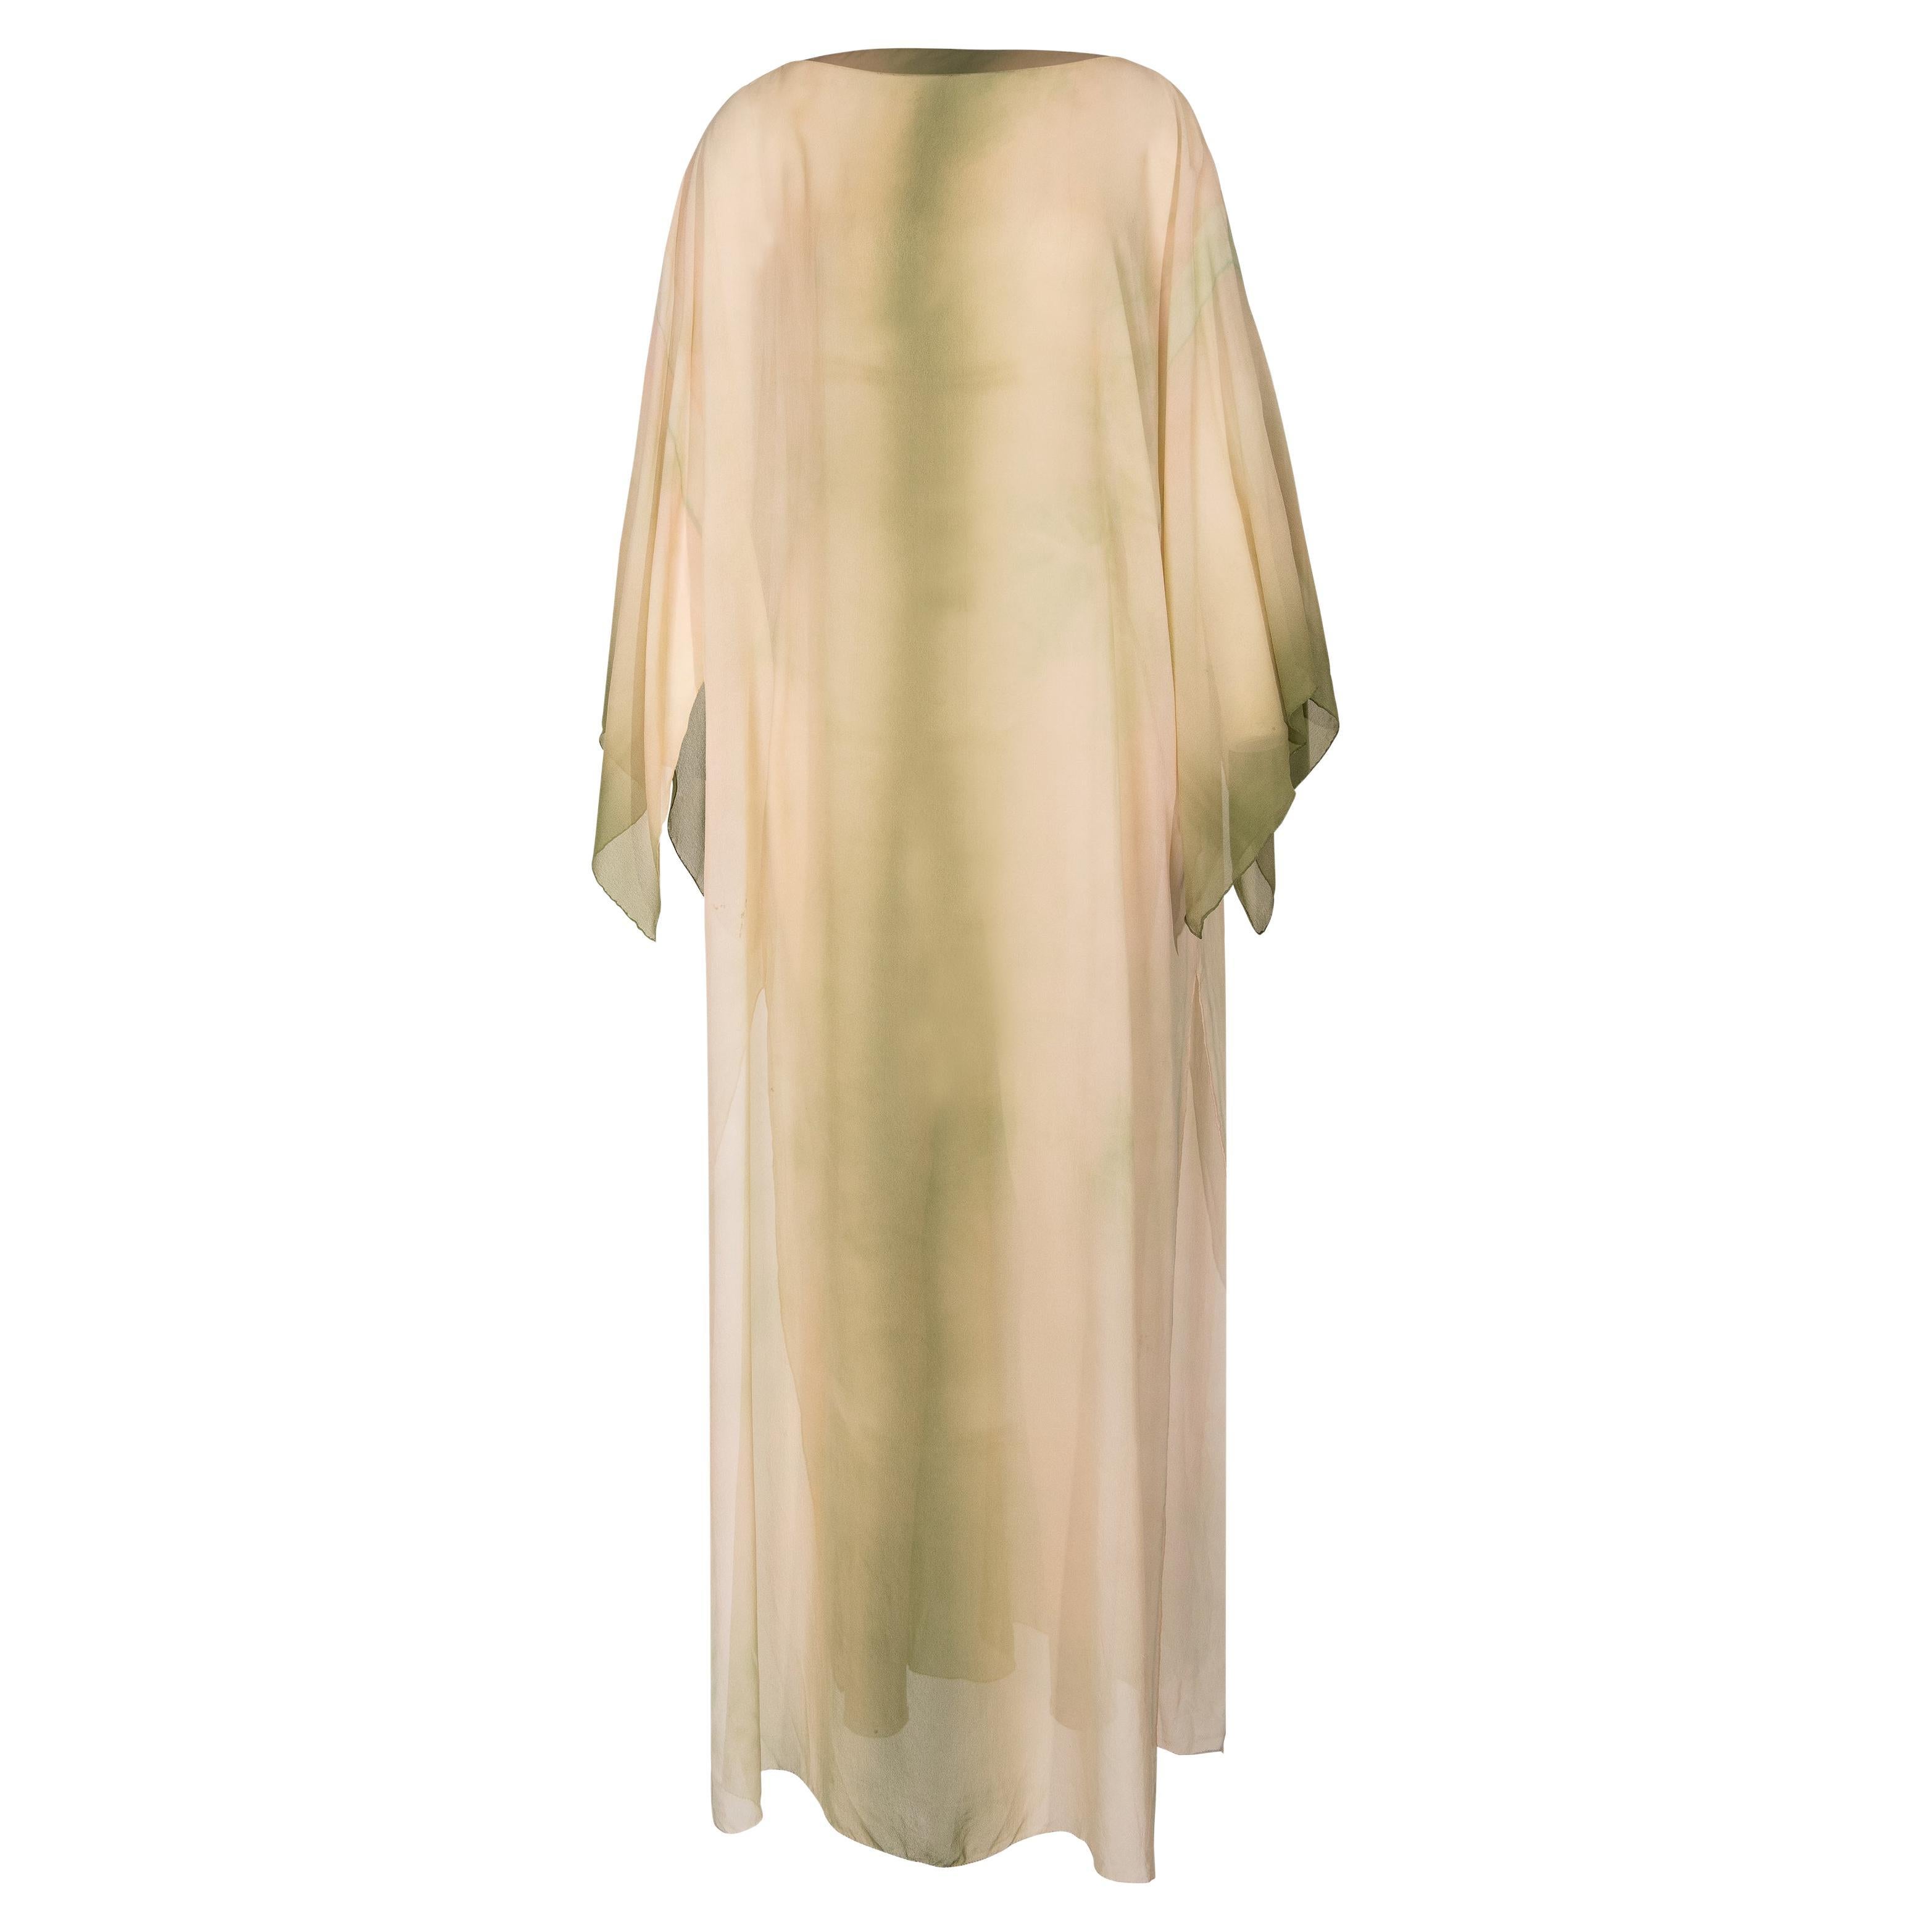 1970's Halston (Attributed) Olive Green and Peach Tie-Dye Caftan